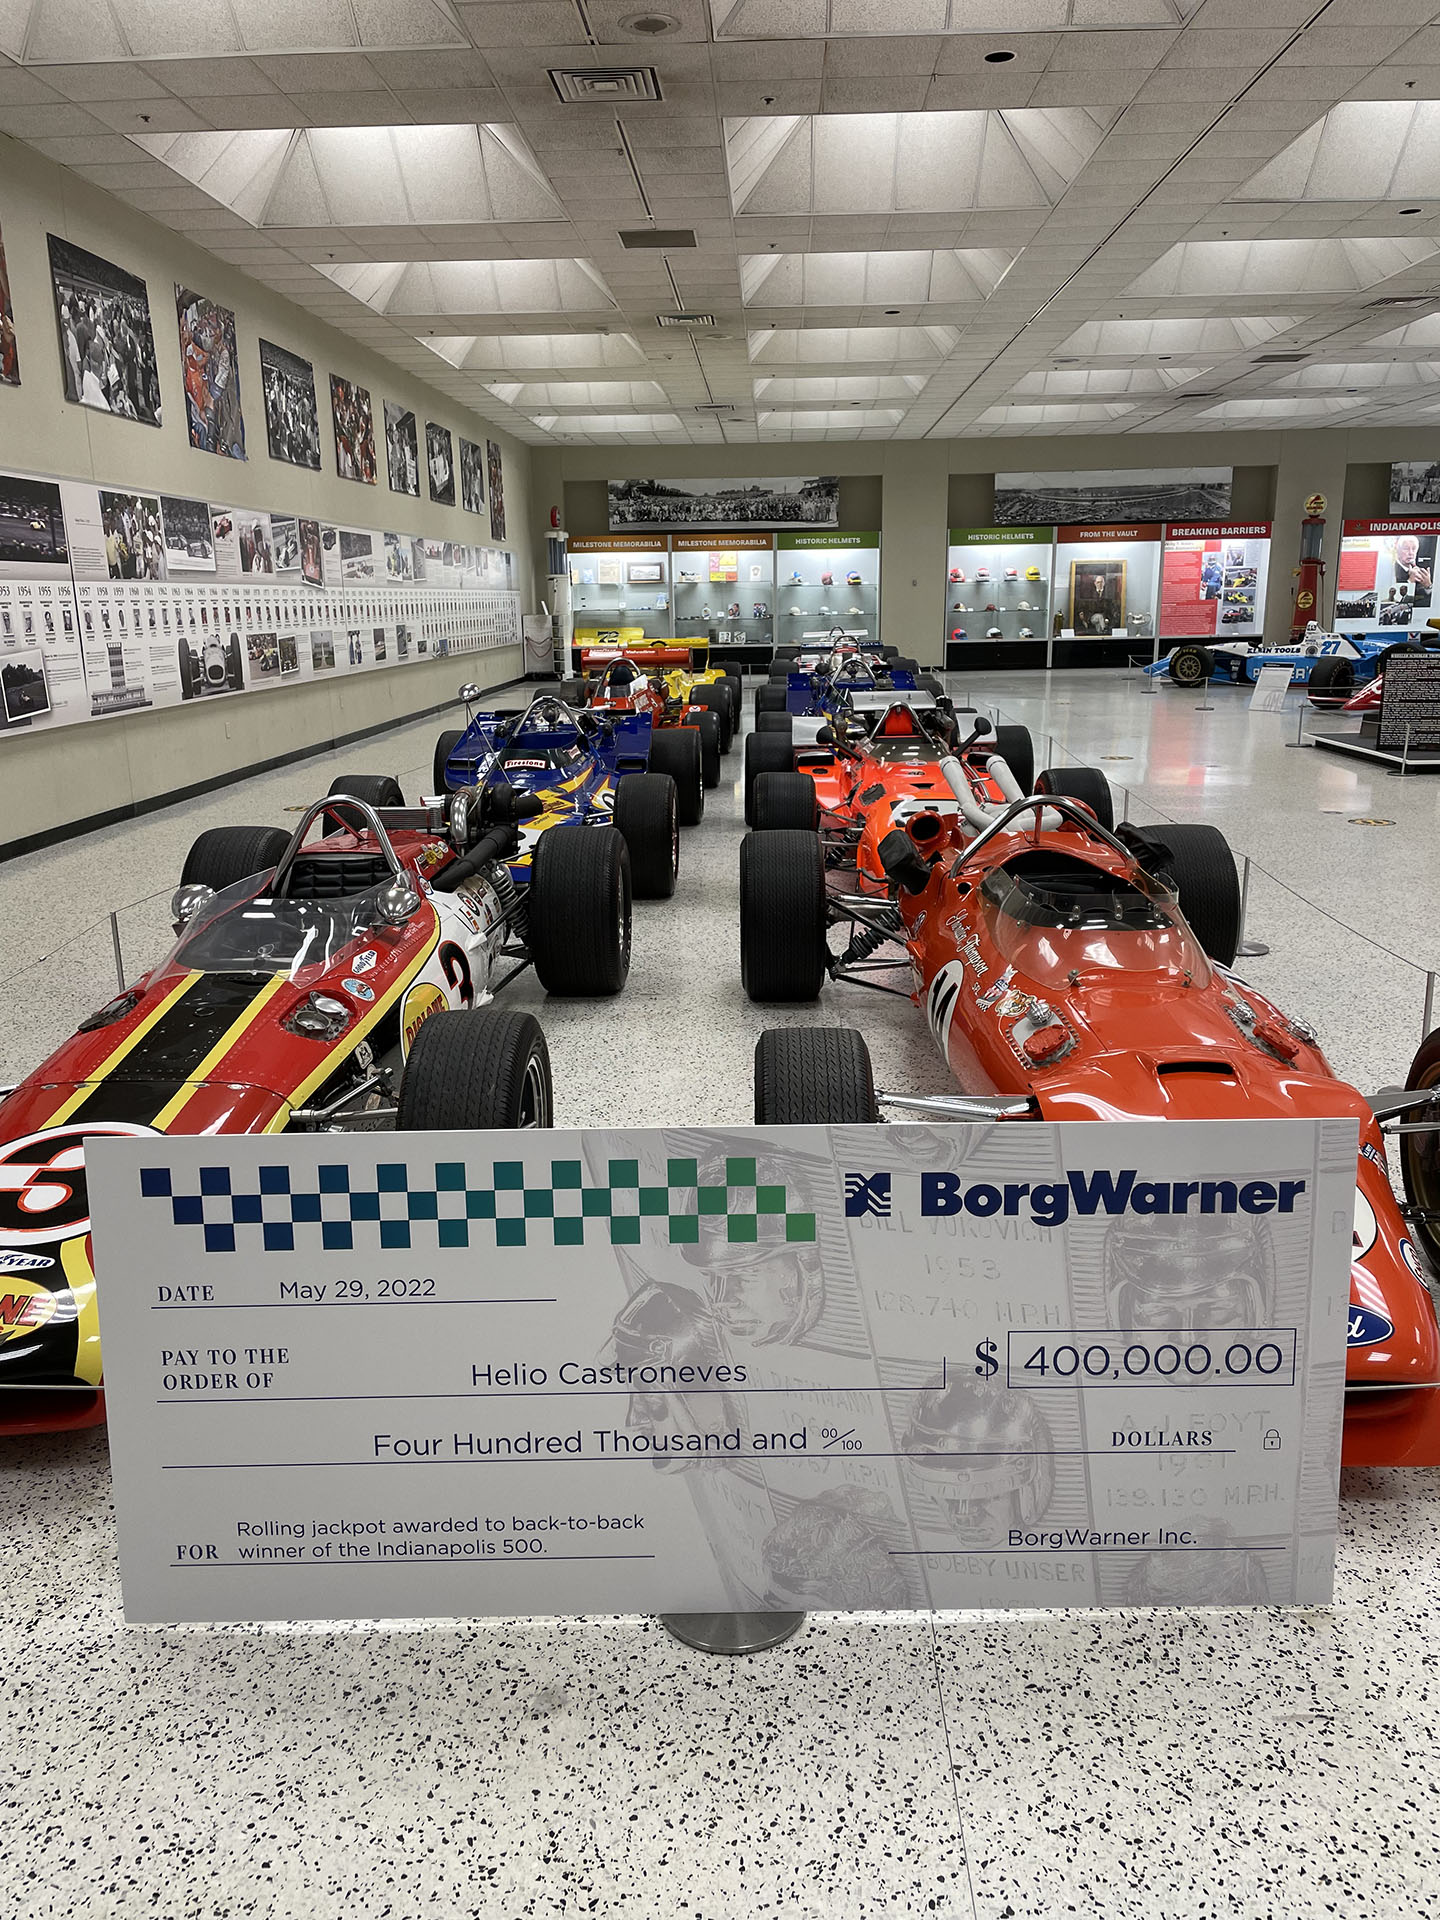 BorgWarner’s $400,000 Indianapolis 500 Rolling Jackpot Up for Grabs Again by 2021 Winner, Helio Castroneves